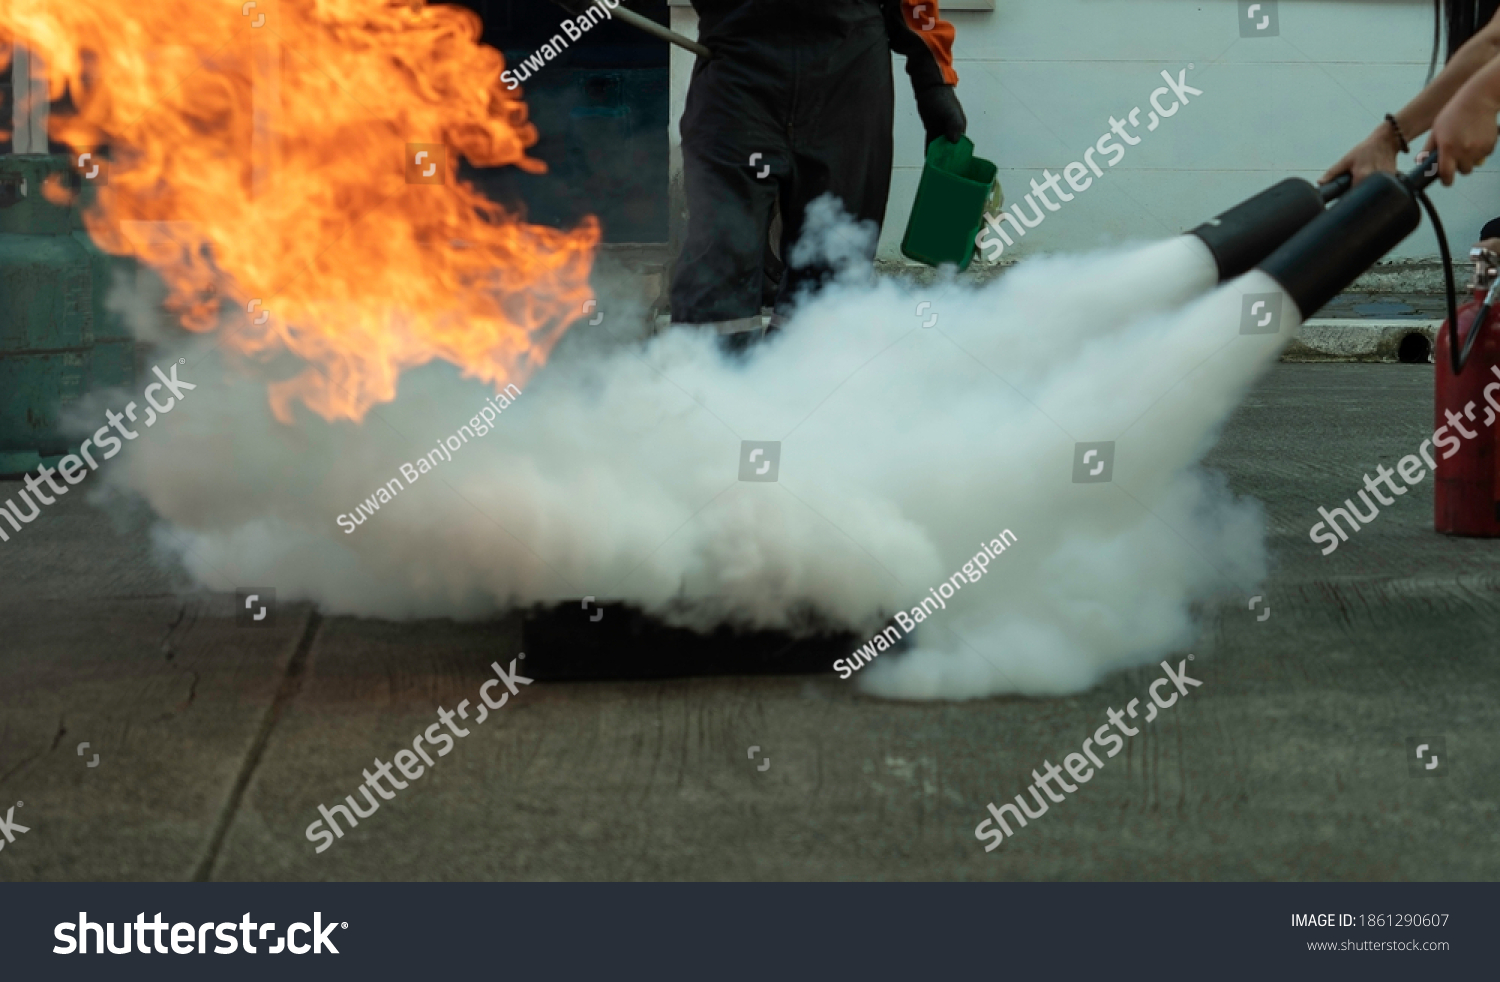 Man teaches or training how to use carbon dioxide (CO2) fire extinguishers to extinguish fires from fuel in house or industry for safety. #1861290607